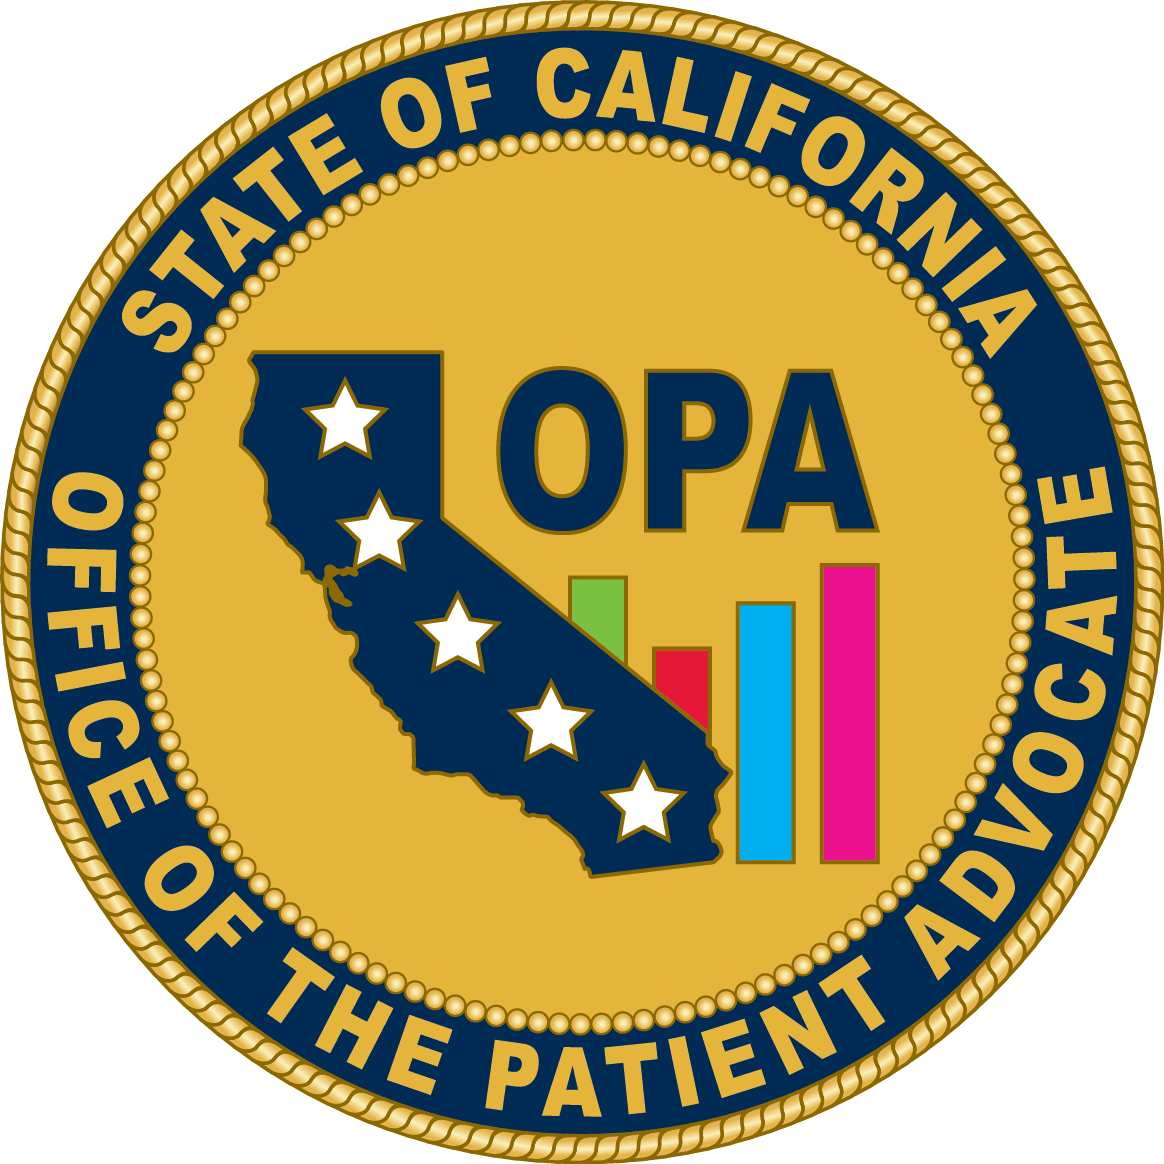 5-Star Patient Experience Rating from the Office of Patient Advocate